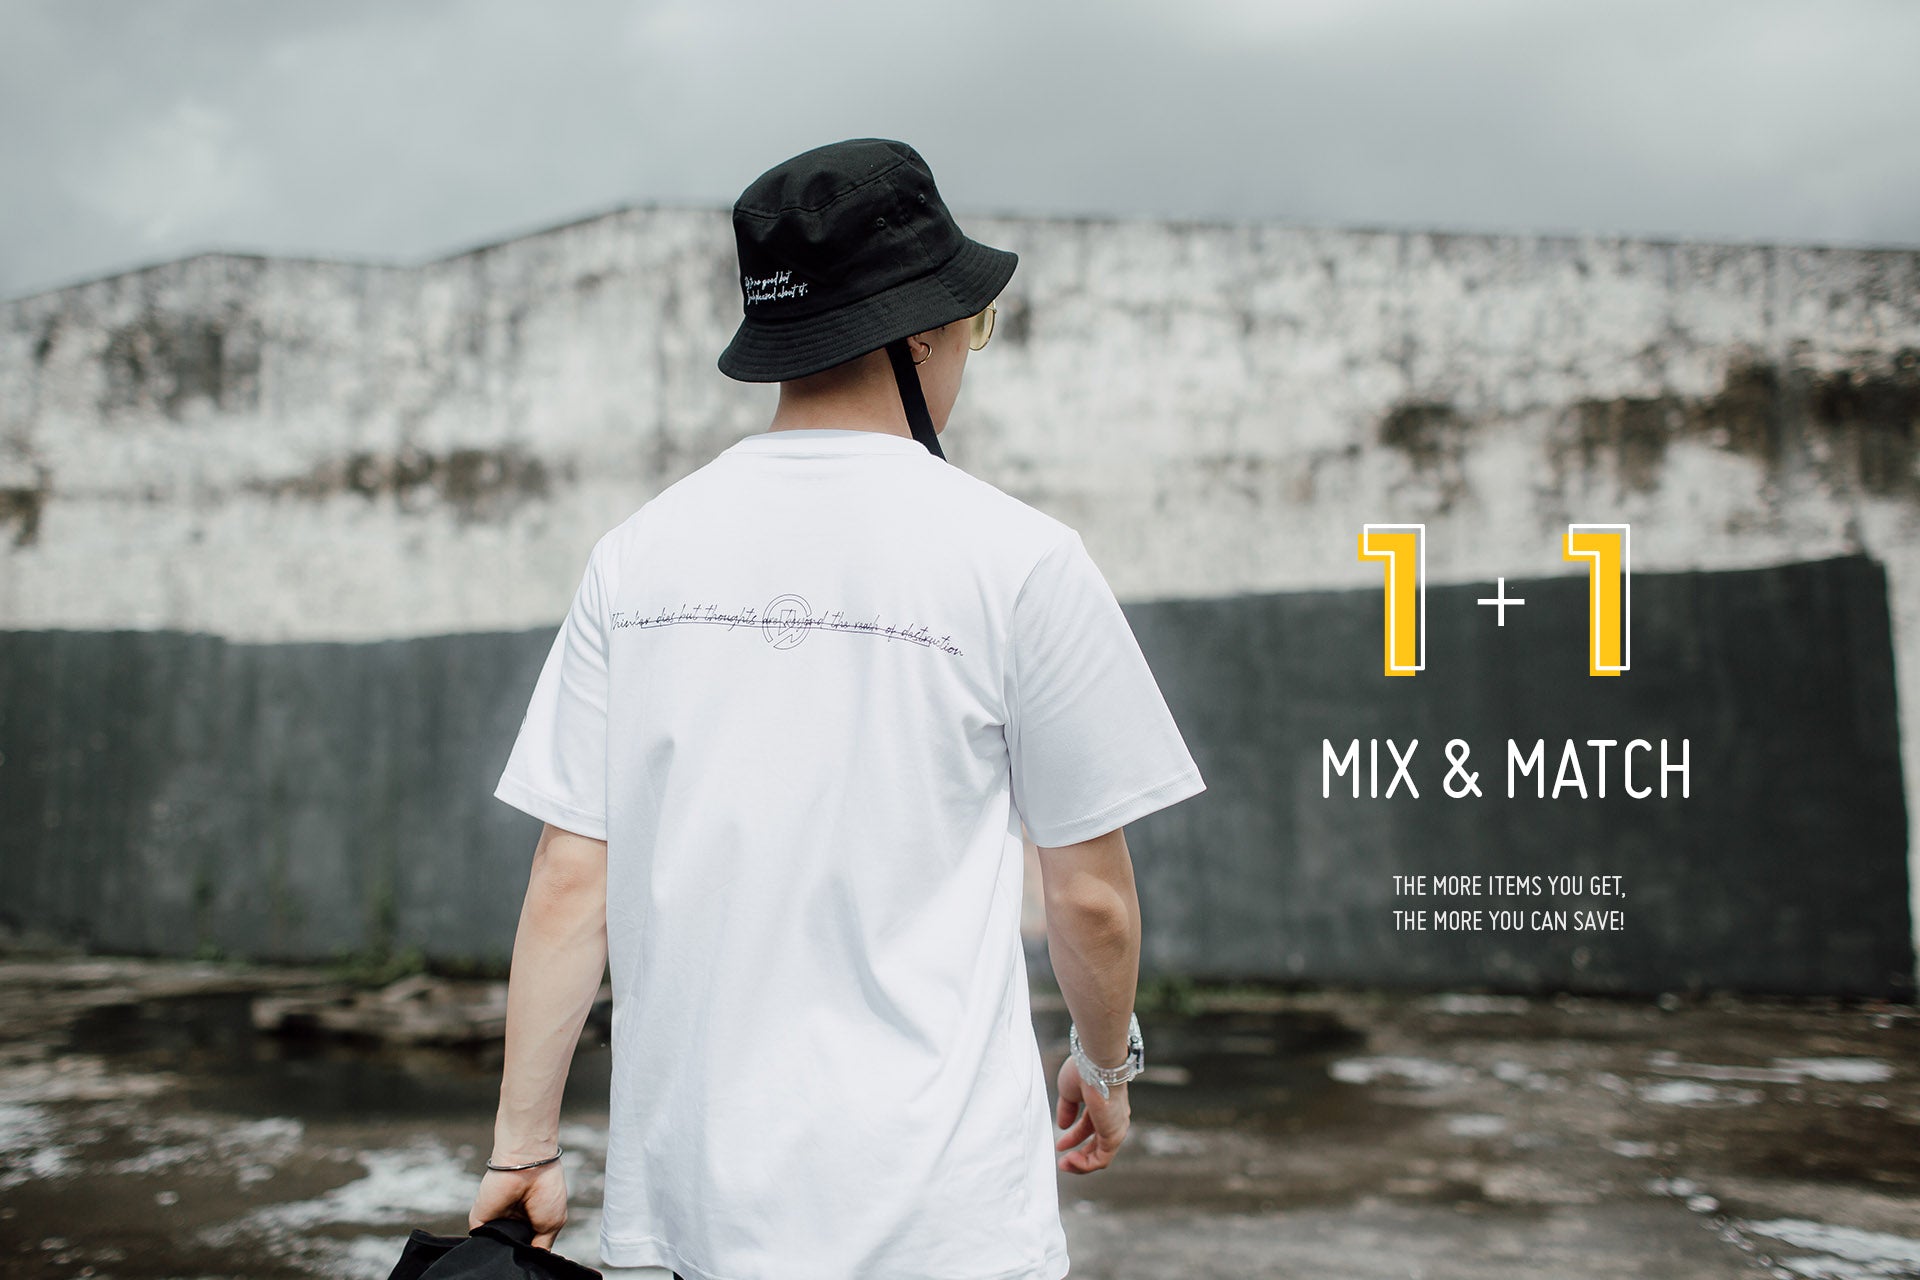 Mix & Match Bundle Campaign Bundle Starting from RM159